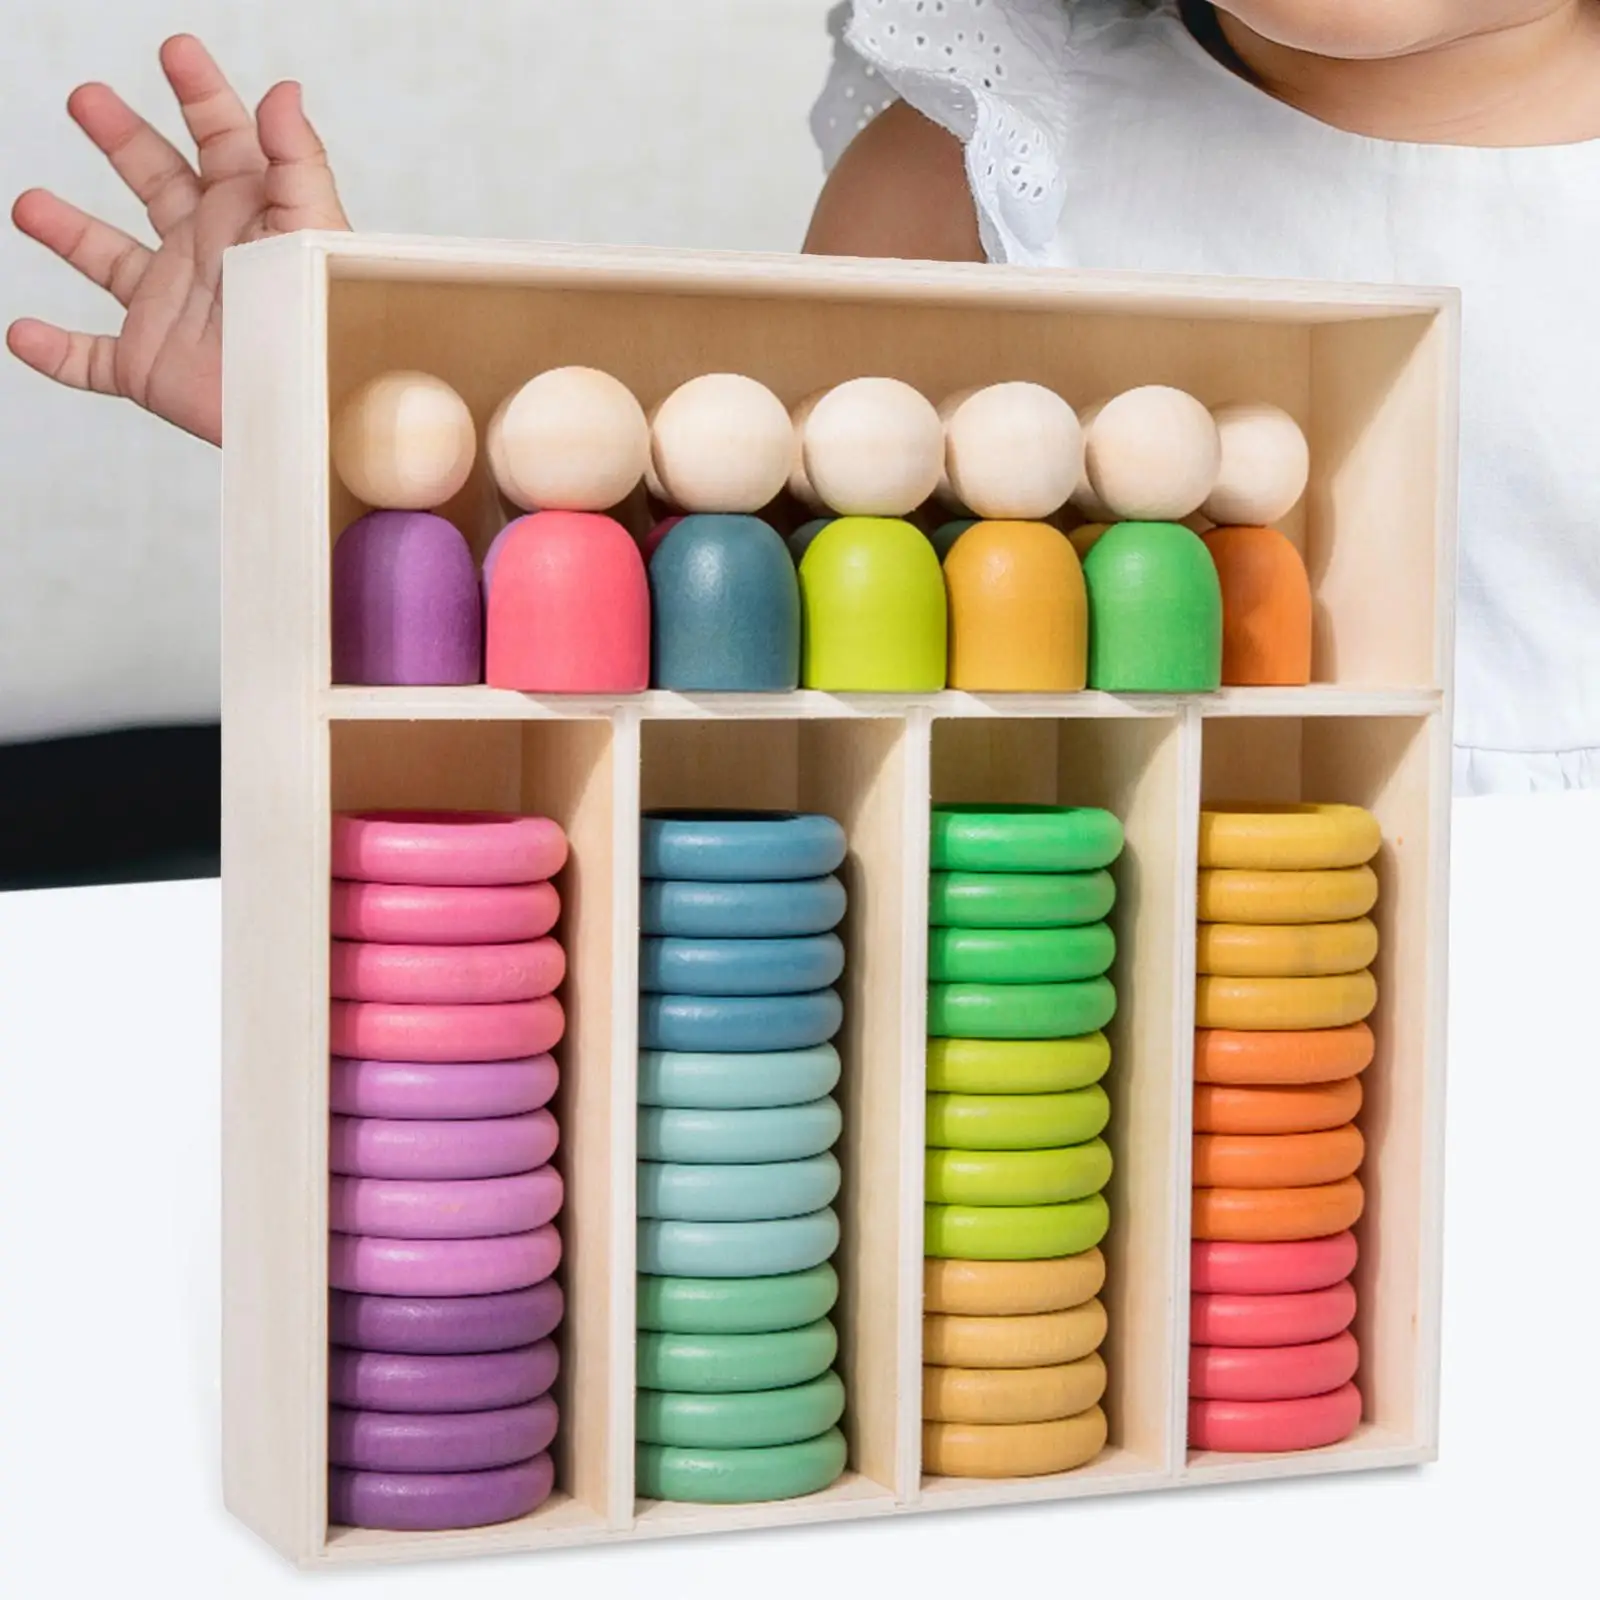 Wooden Rainbow Stacking and Sorting Toy Learning Activity Fine Motor Skill